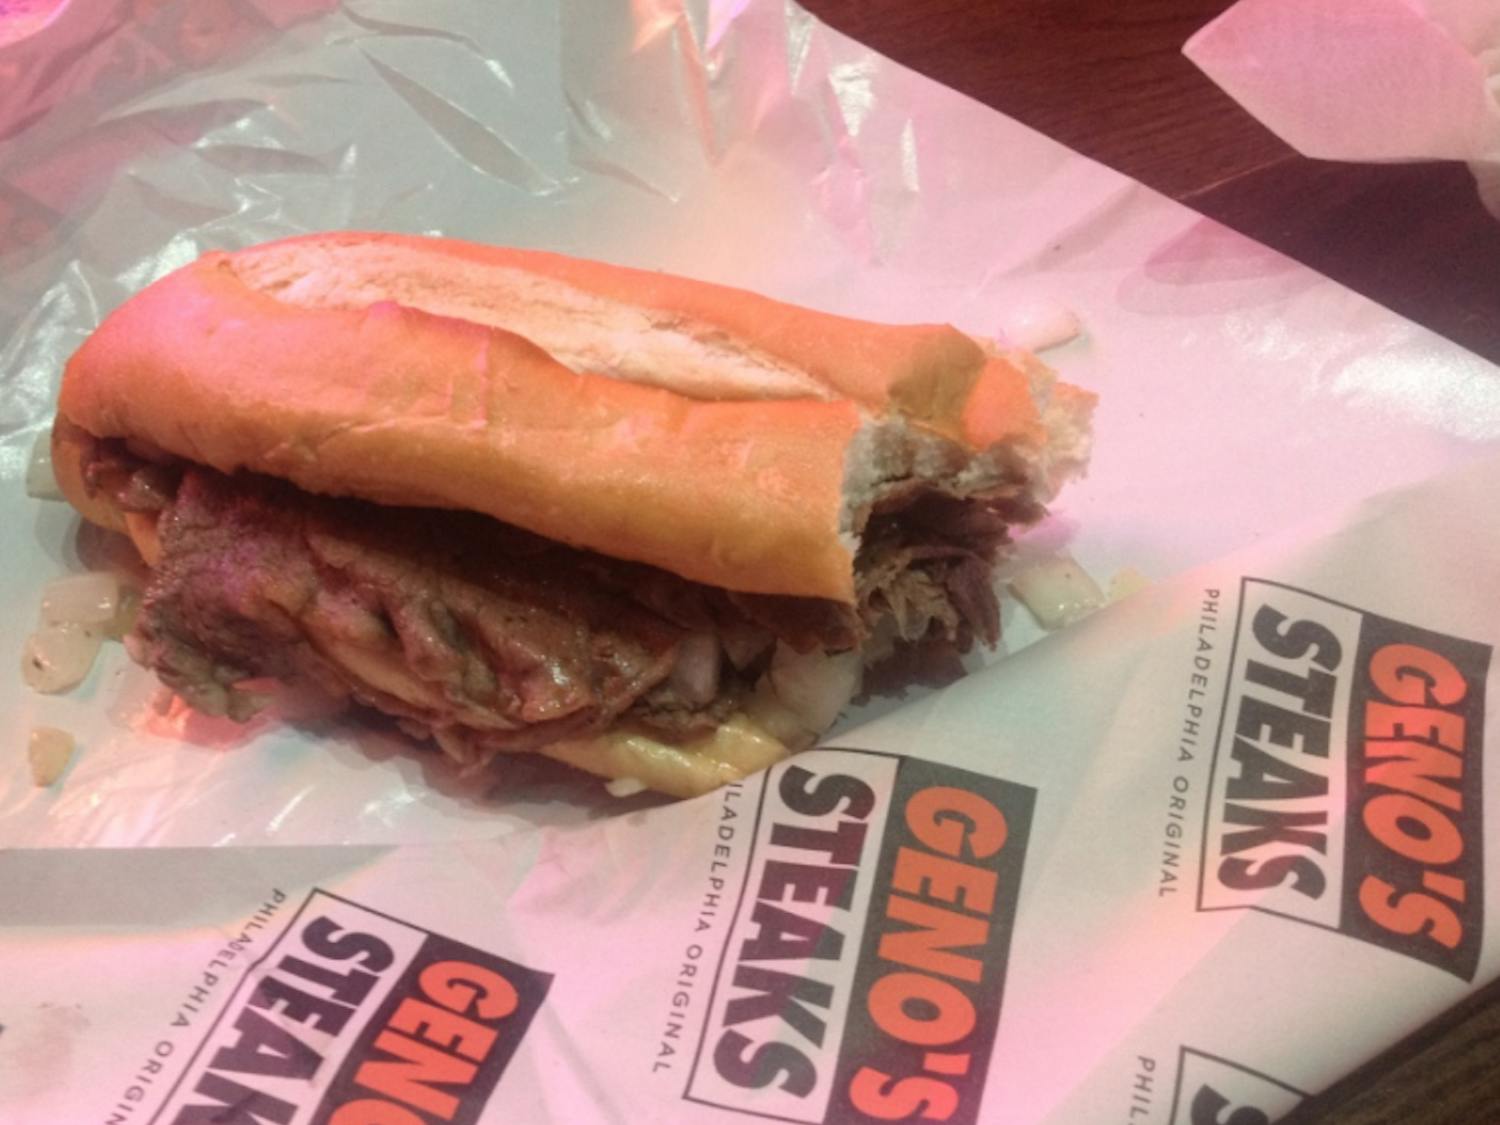 Geno's Steaks, a Philadelphia institution, serves up cheesesteaks on the first day of the Democratic National Convention in Philadelphia on July 25, 2016.